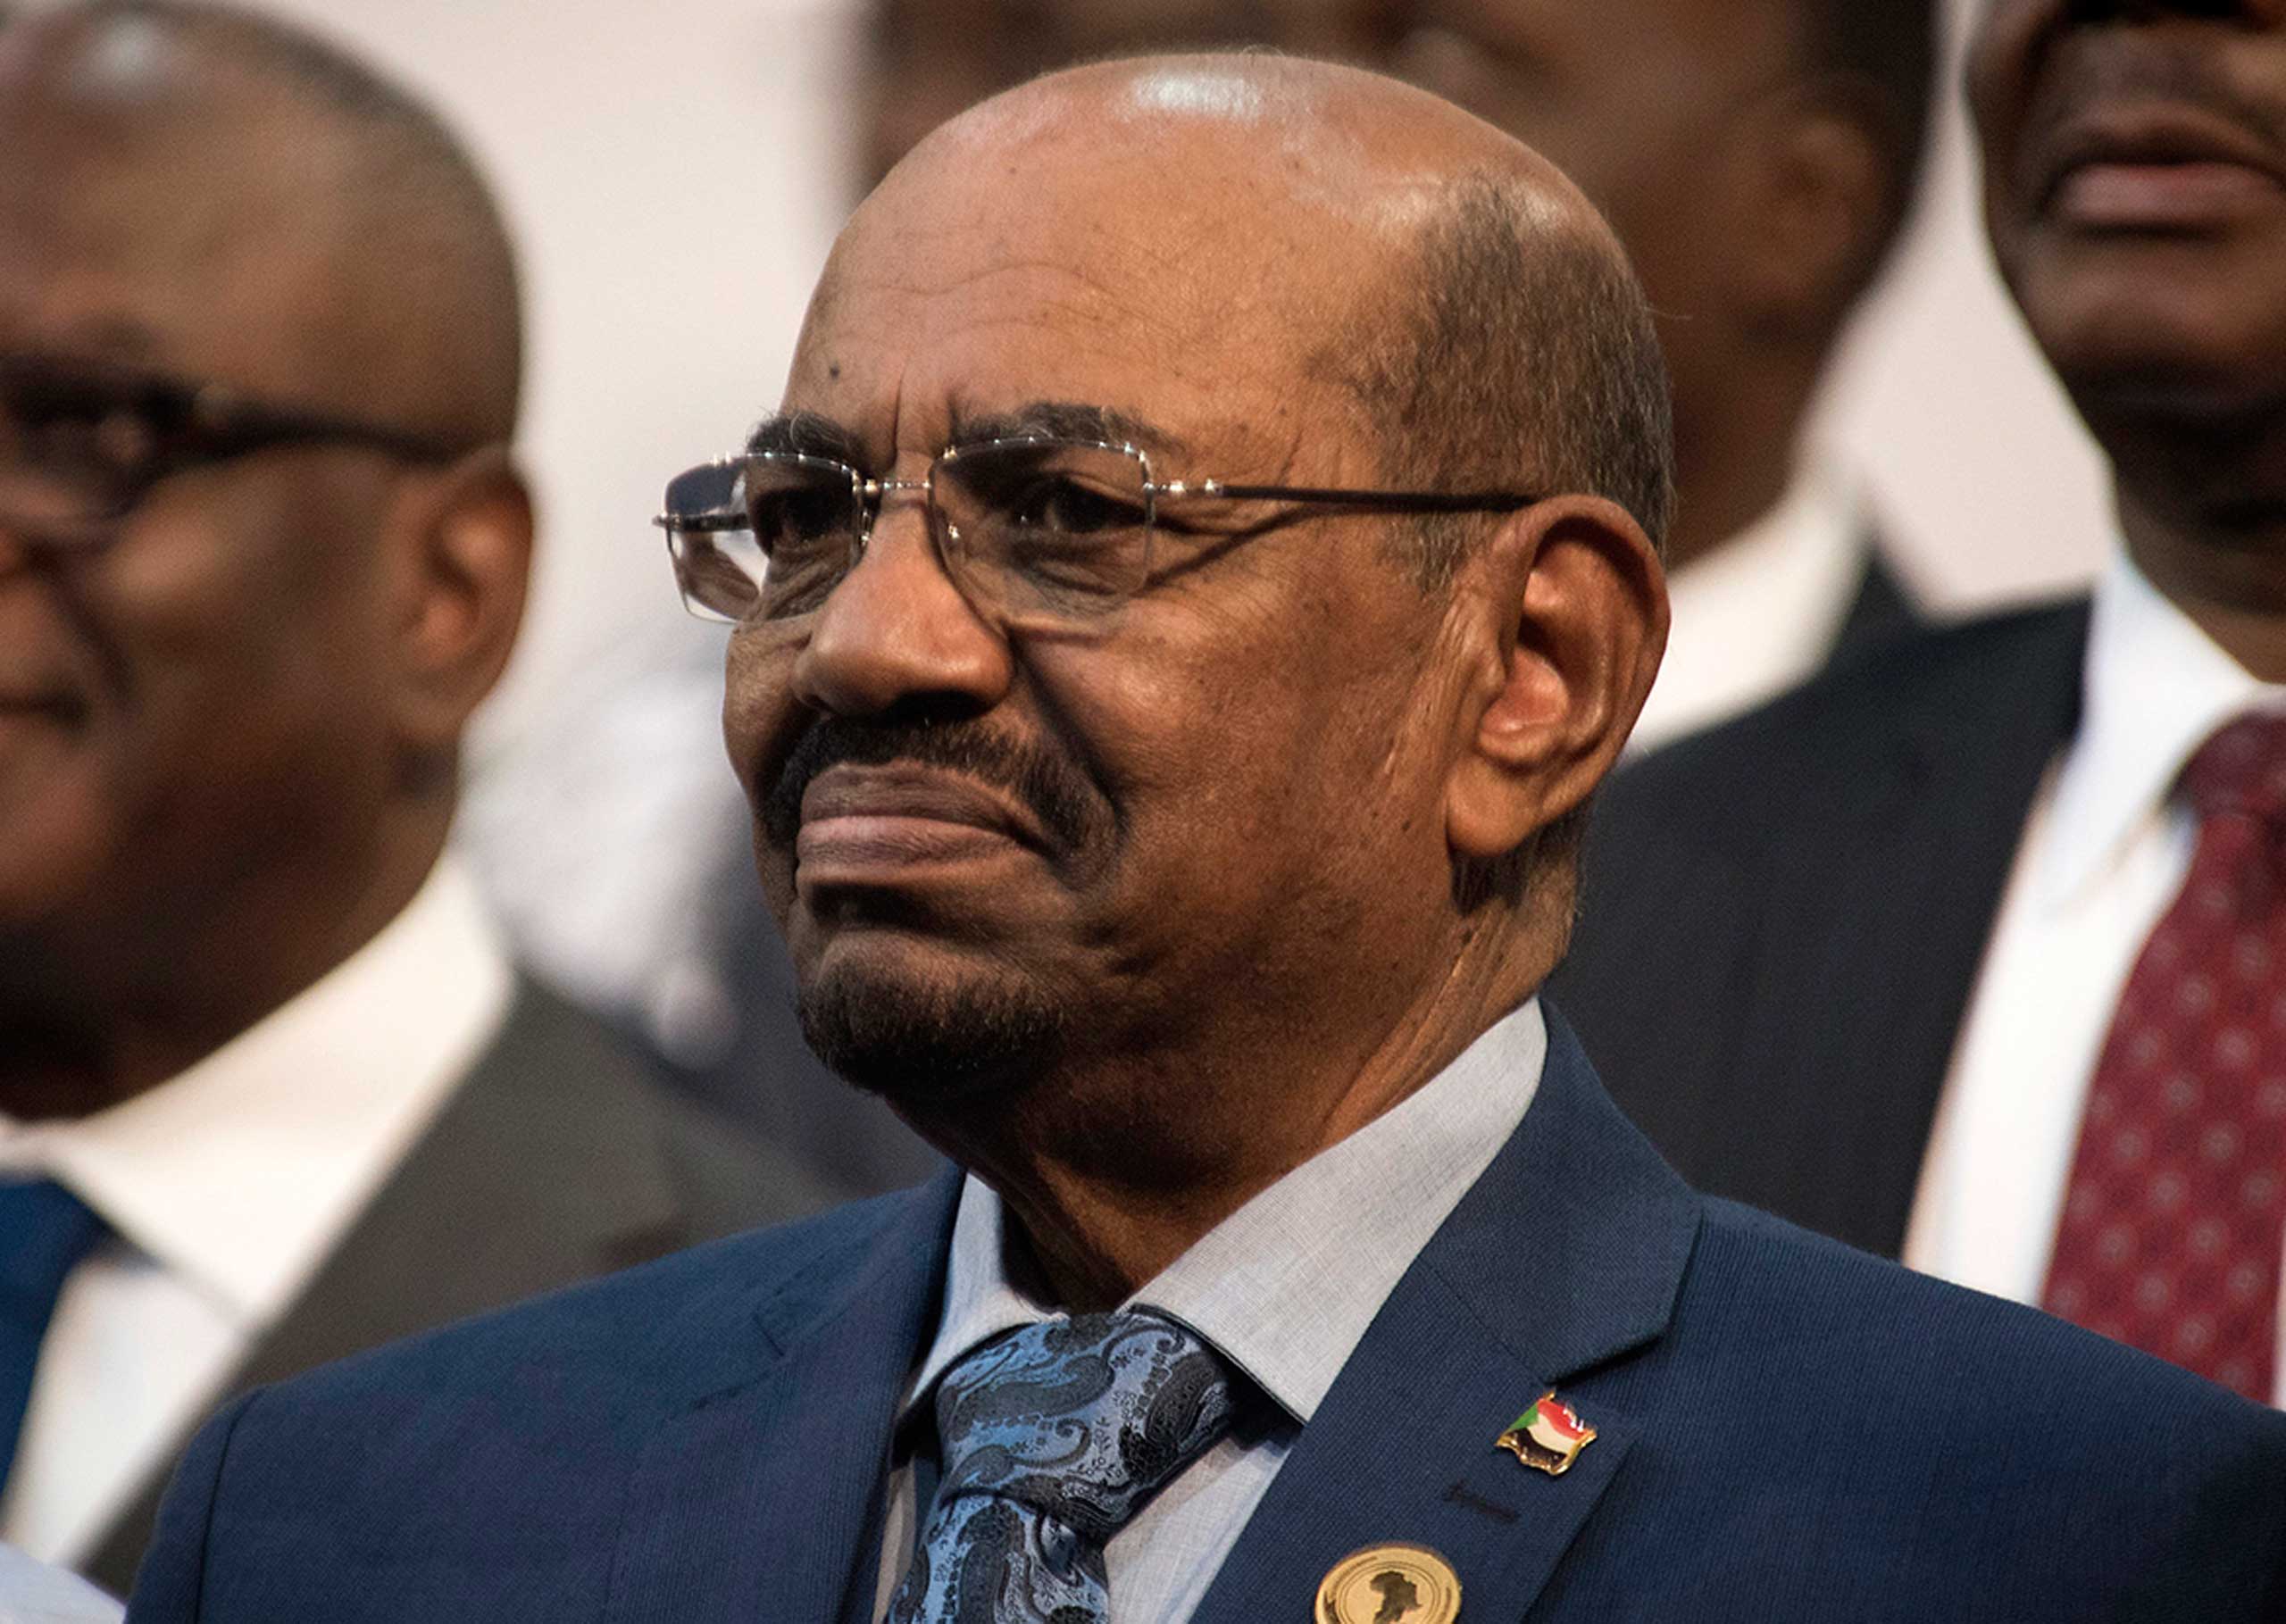 Sudanese President Omar al-Bashir is seen during the opening session of the African Union summit in Johannesburg on June 14, 2015 (Shiraaz Mohamed—AP)